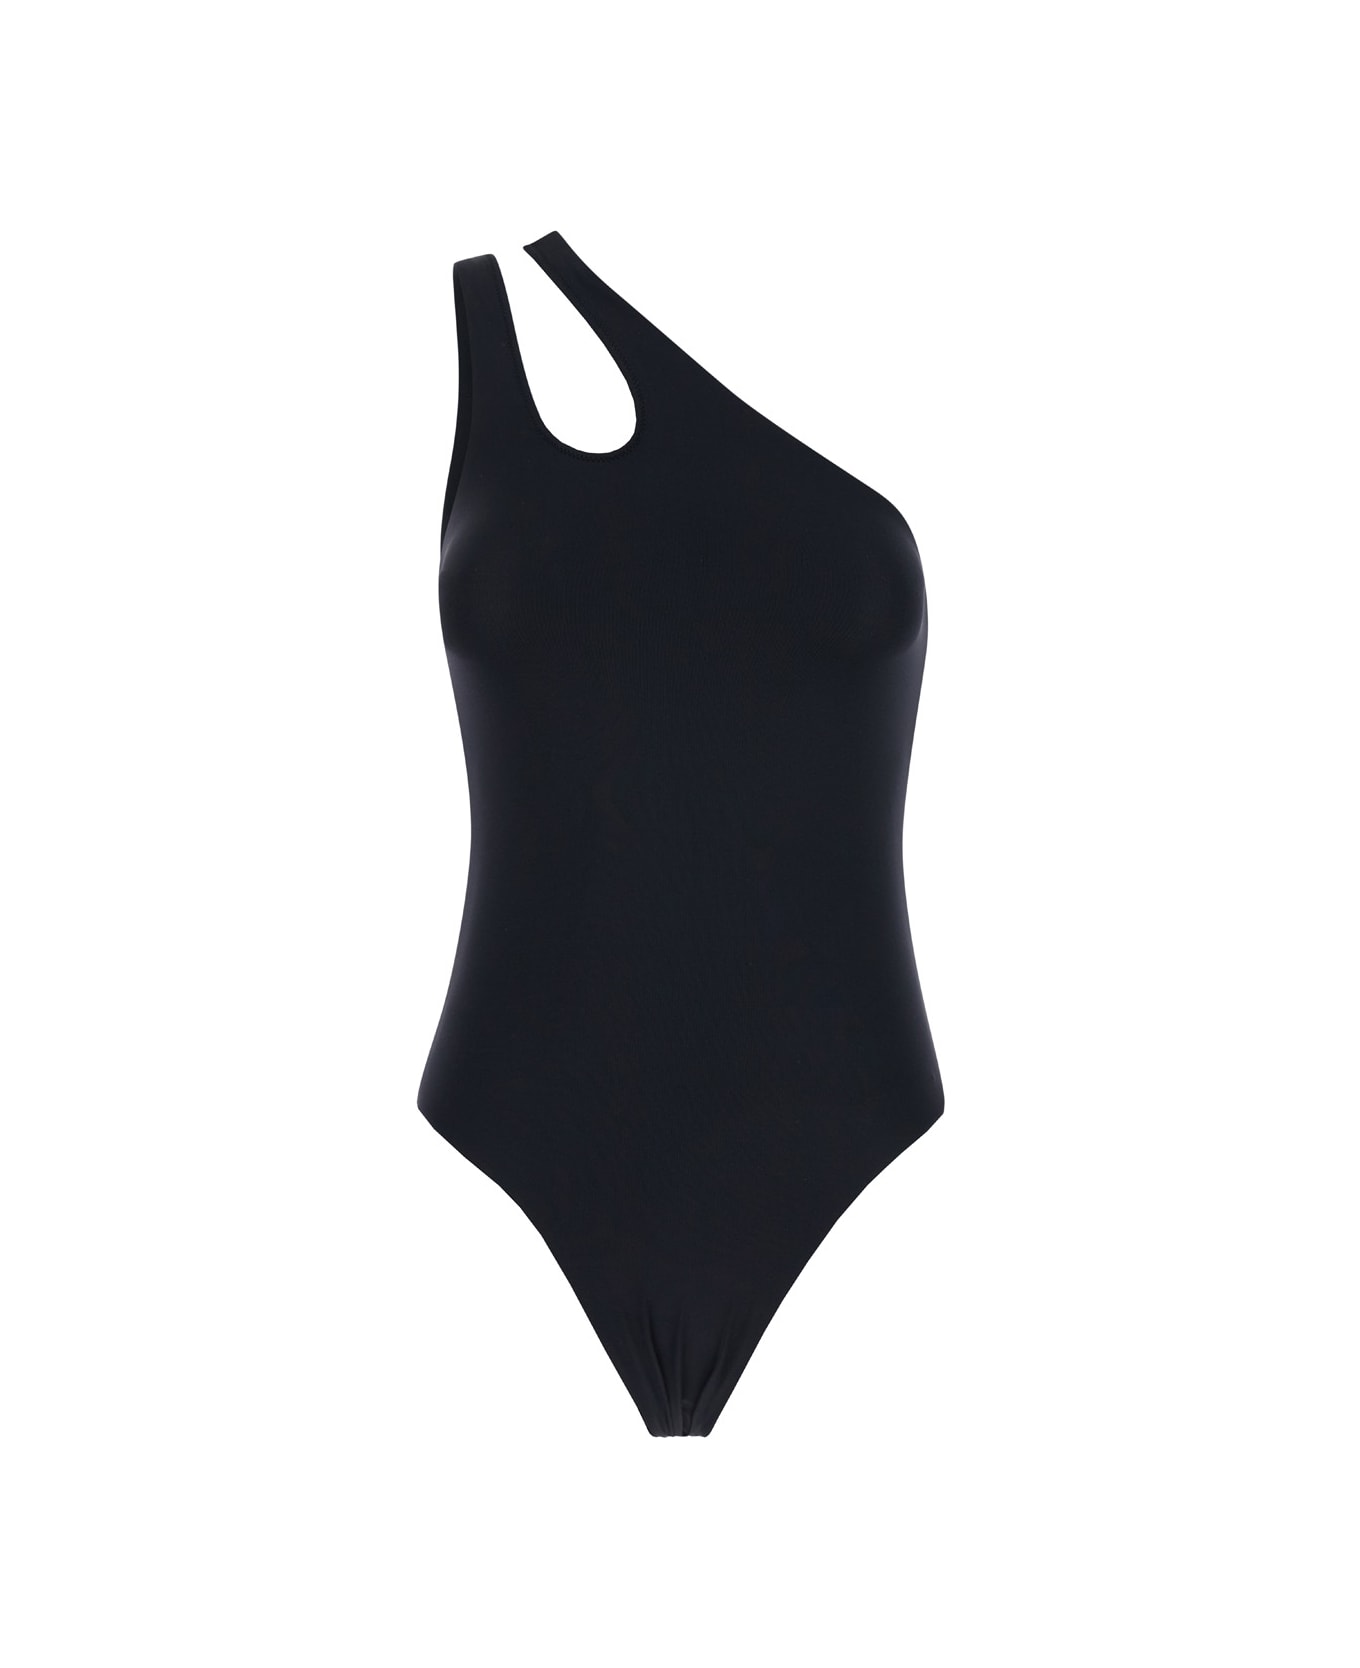 Federica Tosi Black Cut Out Swimsuit In Techno Fabric Stretch Woman - Black